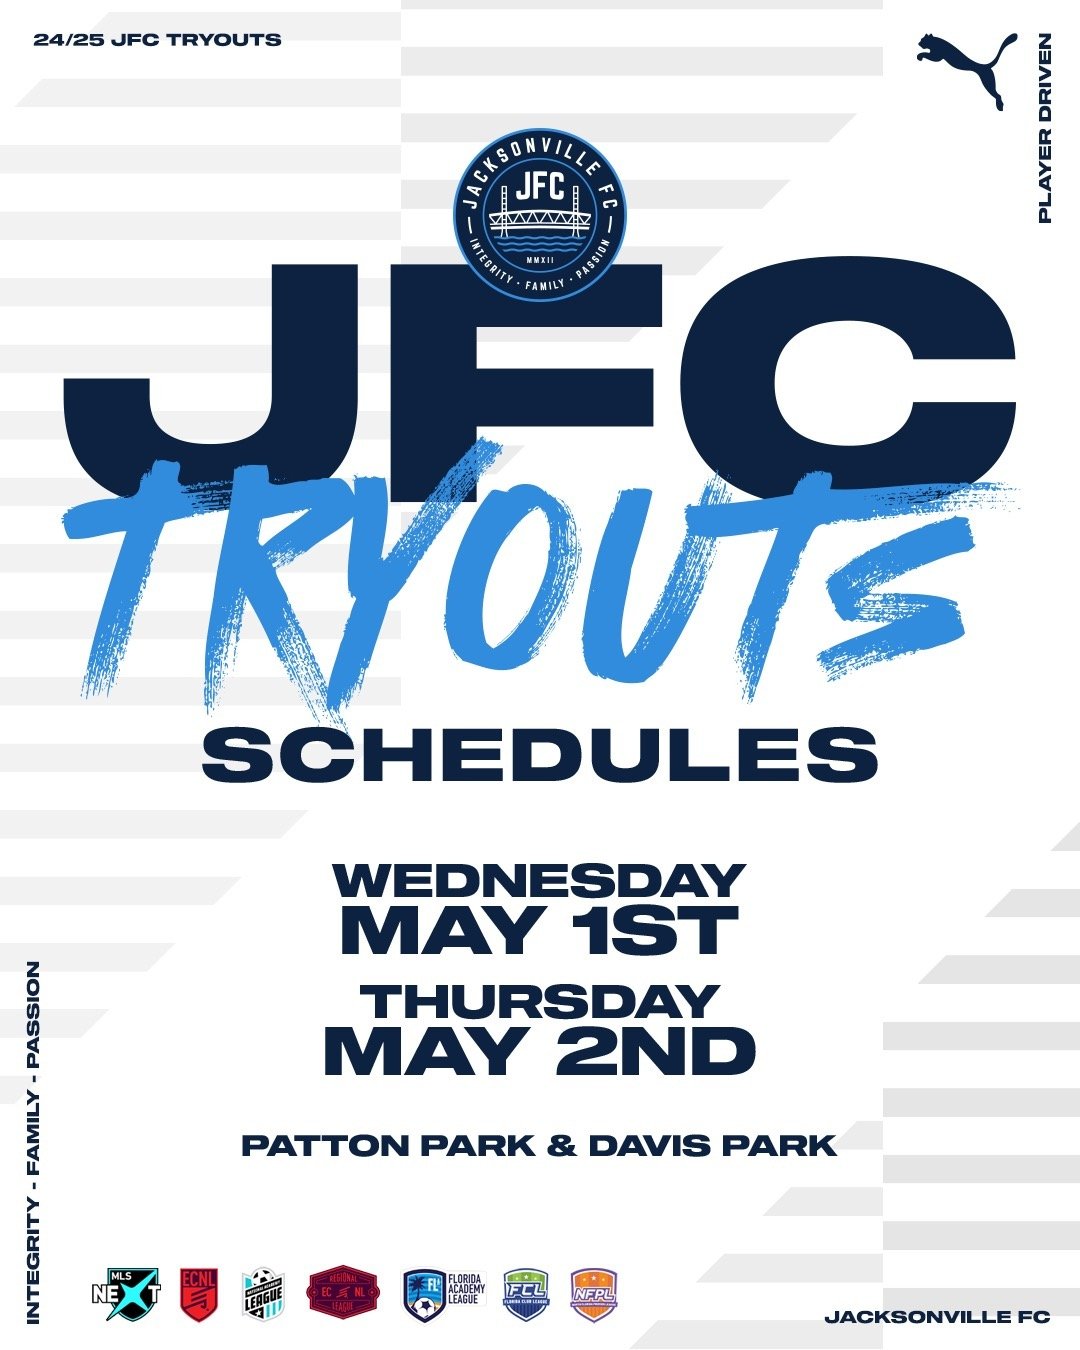 JFC Tryout Schedules are set. Sign up today. Link in profile.

#PlayerDriven #904JFC